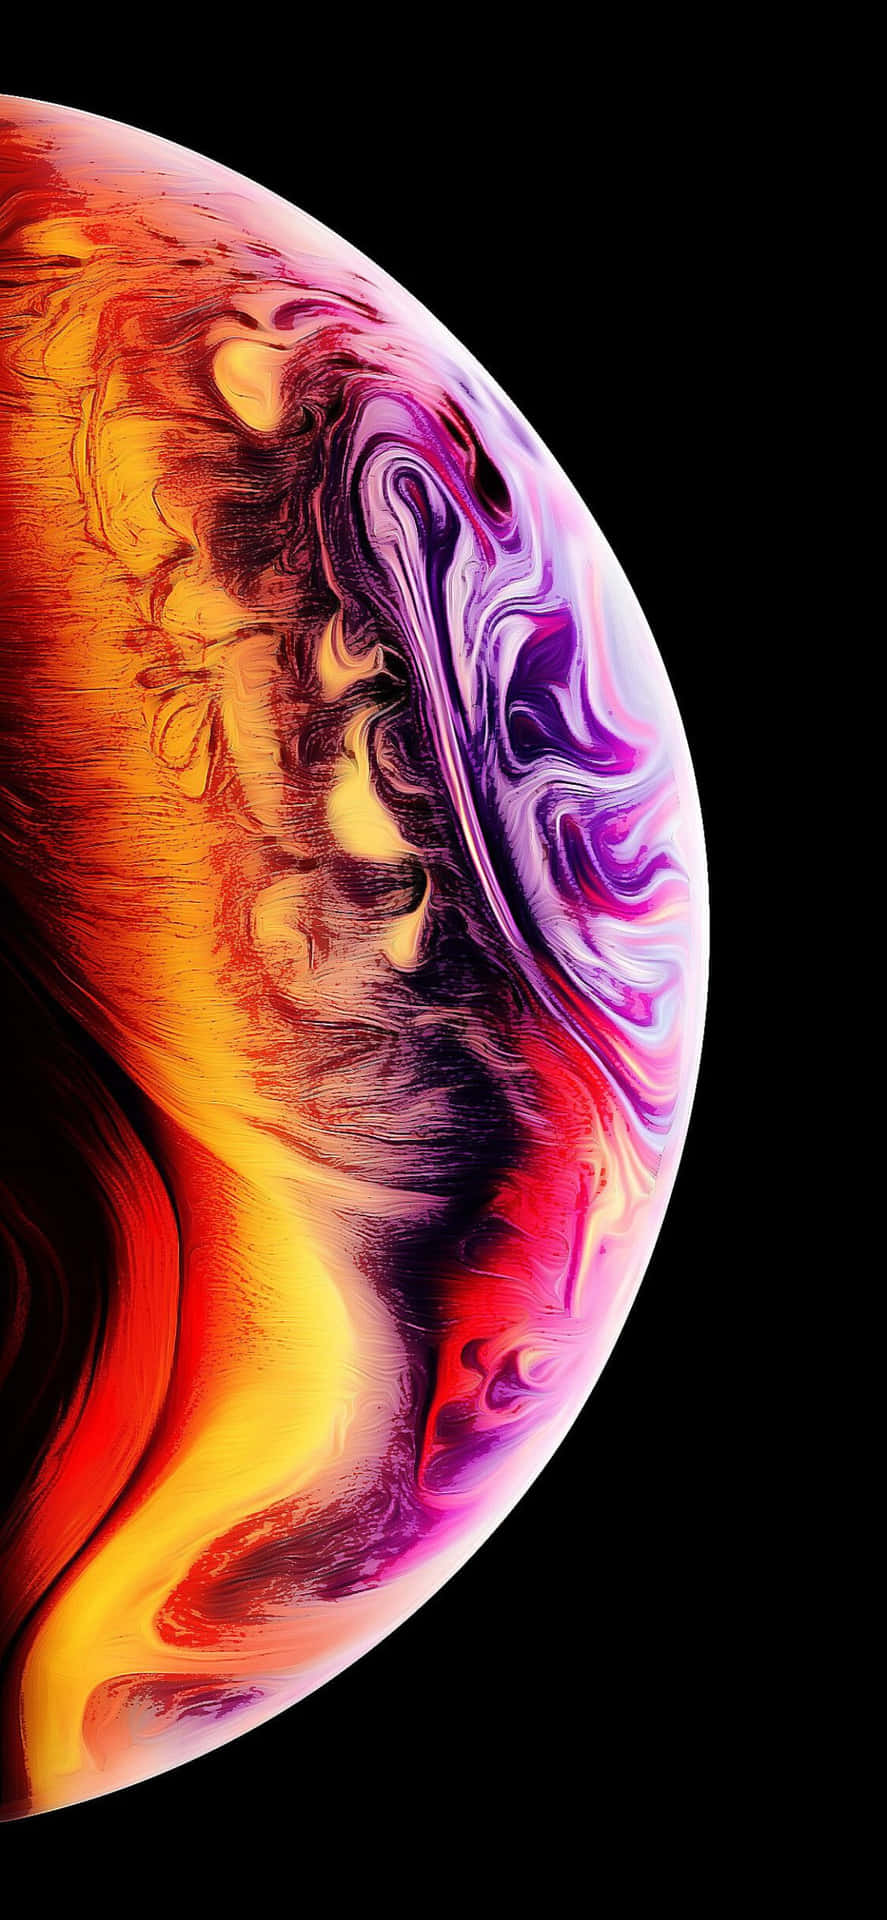 An Abstract Image Of A Colorful Apple Iphone Xs